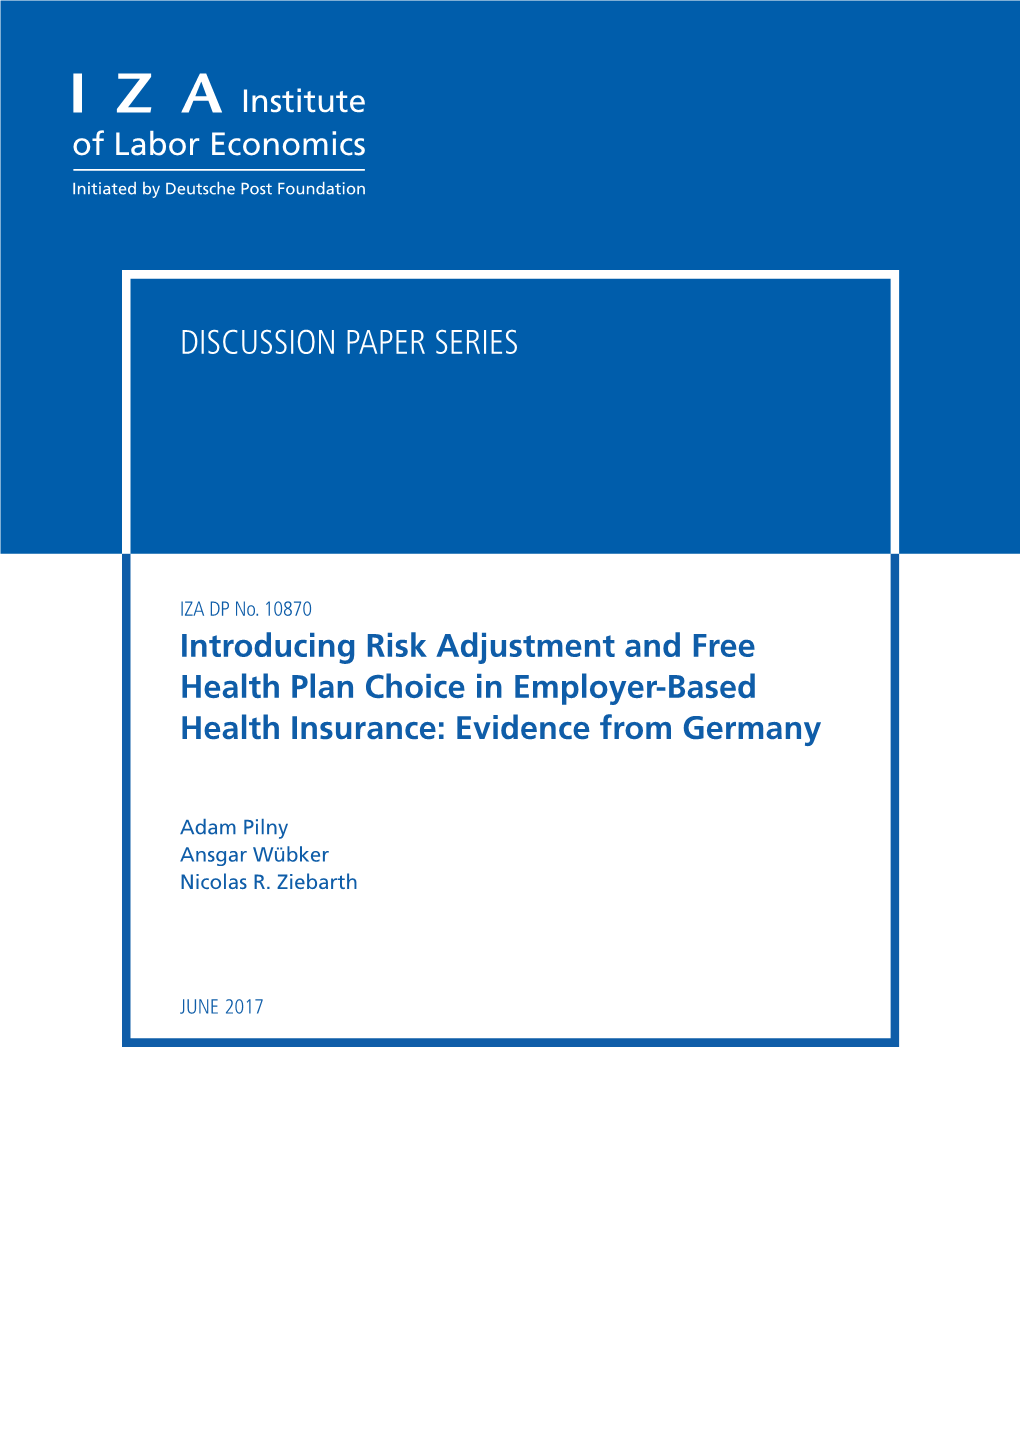 Introducing Risk Adjustment and Free Health Plan Choice in Employer-Based Health Insurance: Evidence from Germany